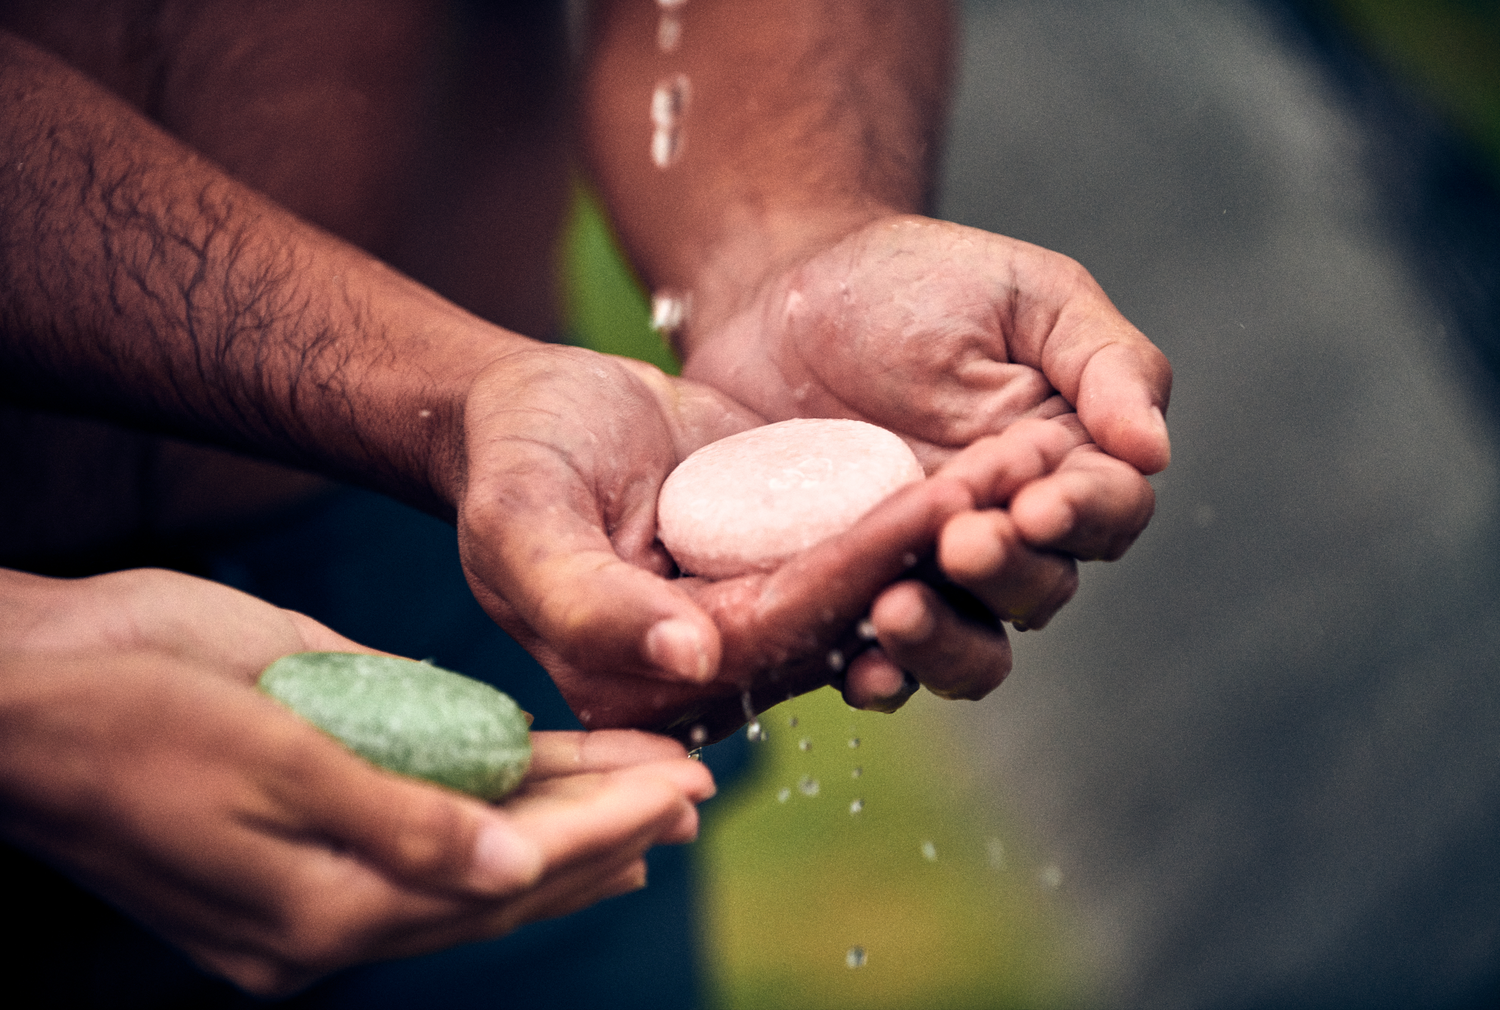 This image shows two people holding solid shampoo bars with water being poured into their hands. These are a part of Desesh's range of zero waste, plastic free, eco friendly, more sustainable personal care and everyday essential products.